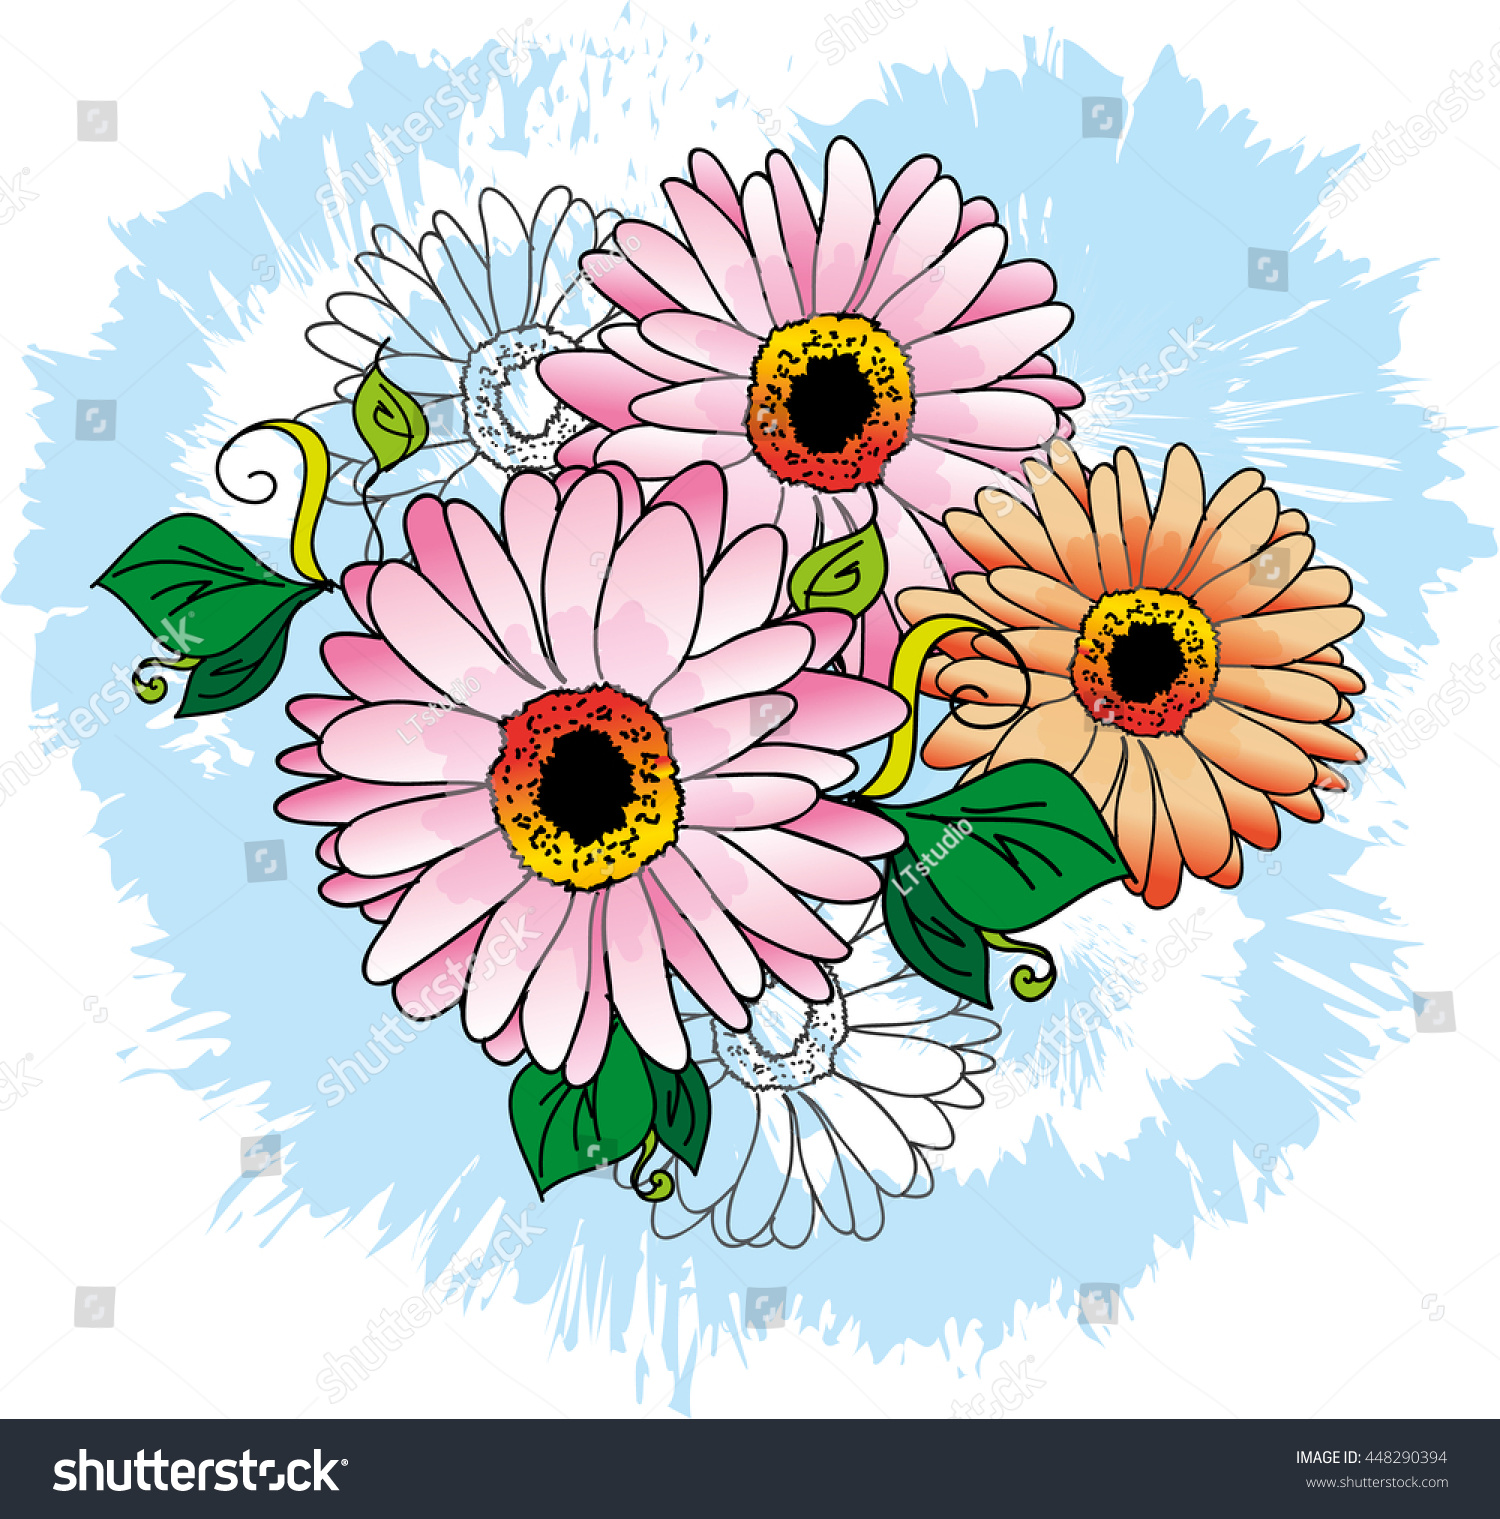 Decorative Floral Background Flowers Stock Vector 448290394 - Shutterstock